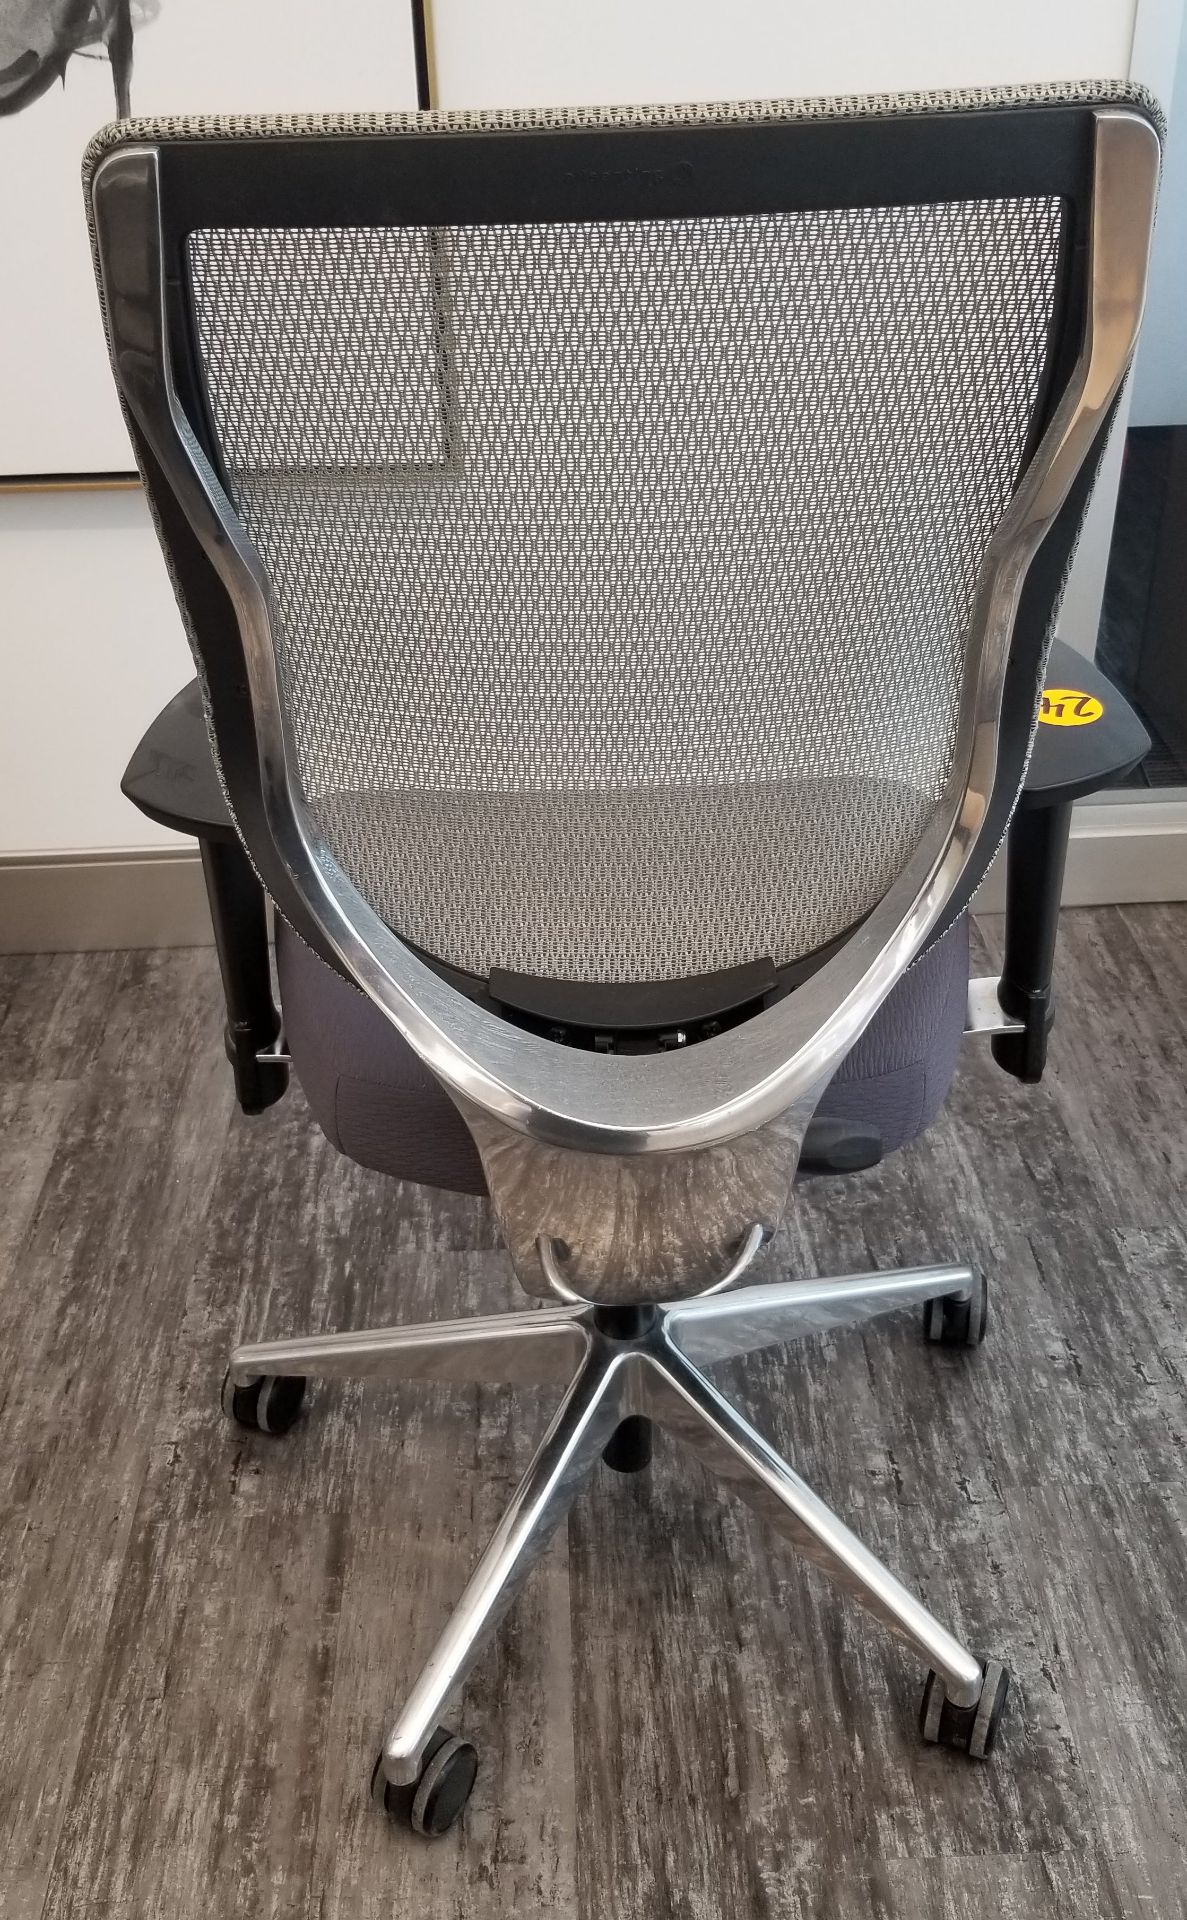 ALLSEATING - EXEC. CHAIR ON CASTERS, GREY W/ MESH BACK, ADJUSTABLE HEIGHT, ADJUSTABLE ARMS - Image 2 of 5